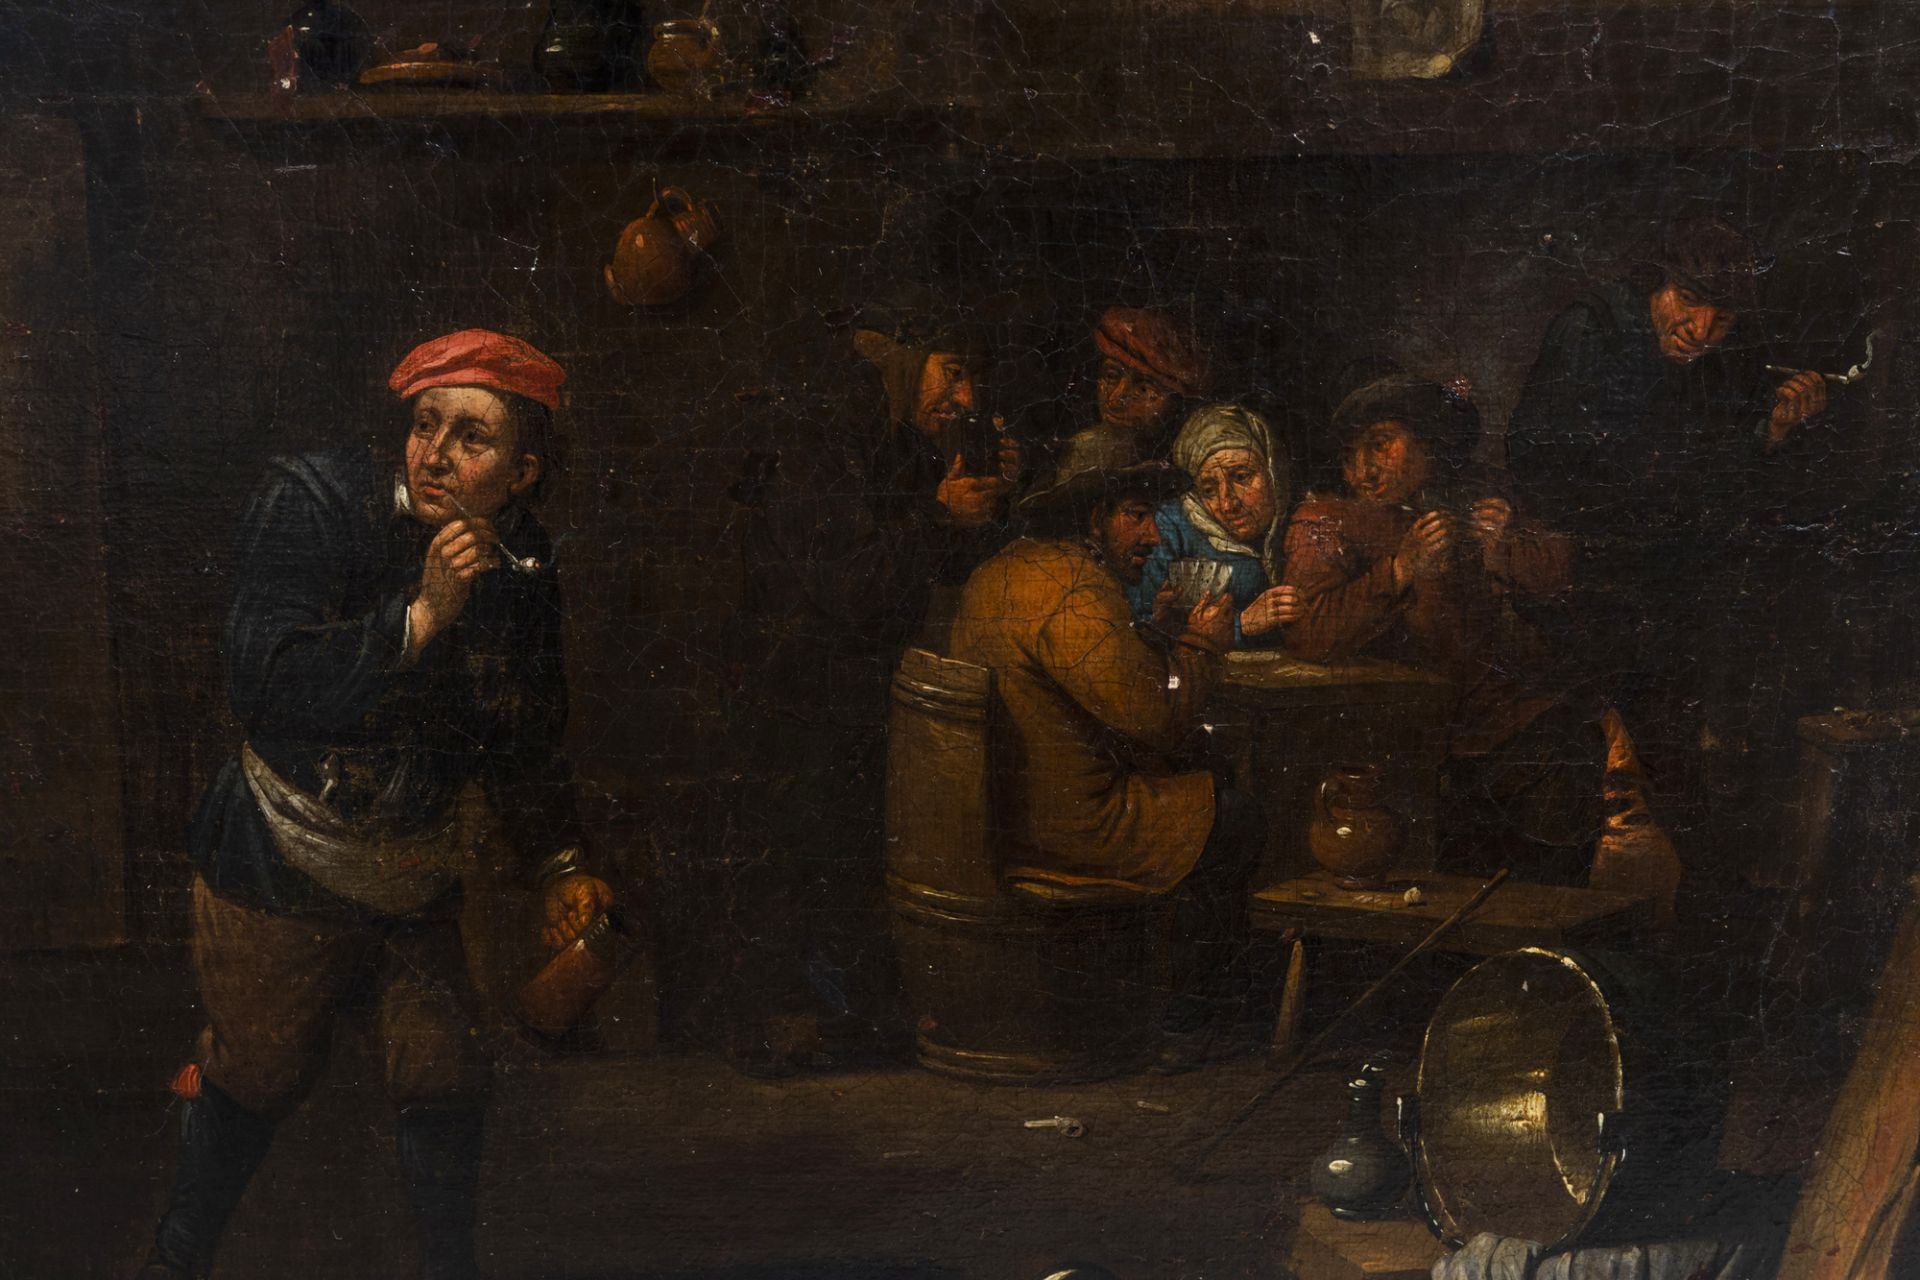 Victor Mahu (1647-1700): Peasants making merry at an inn, oil on canvas - Image 6 of 6